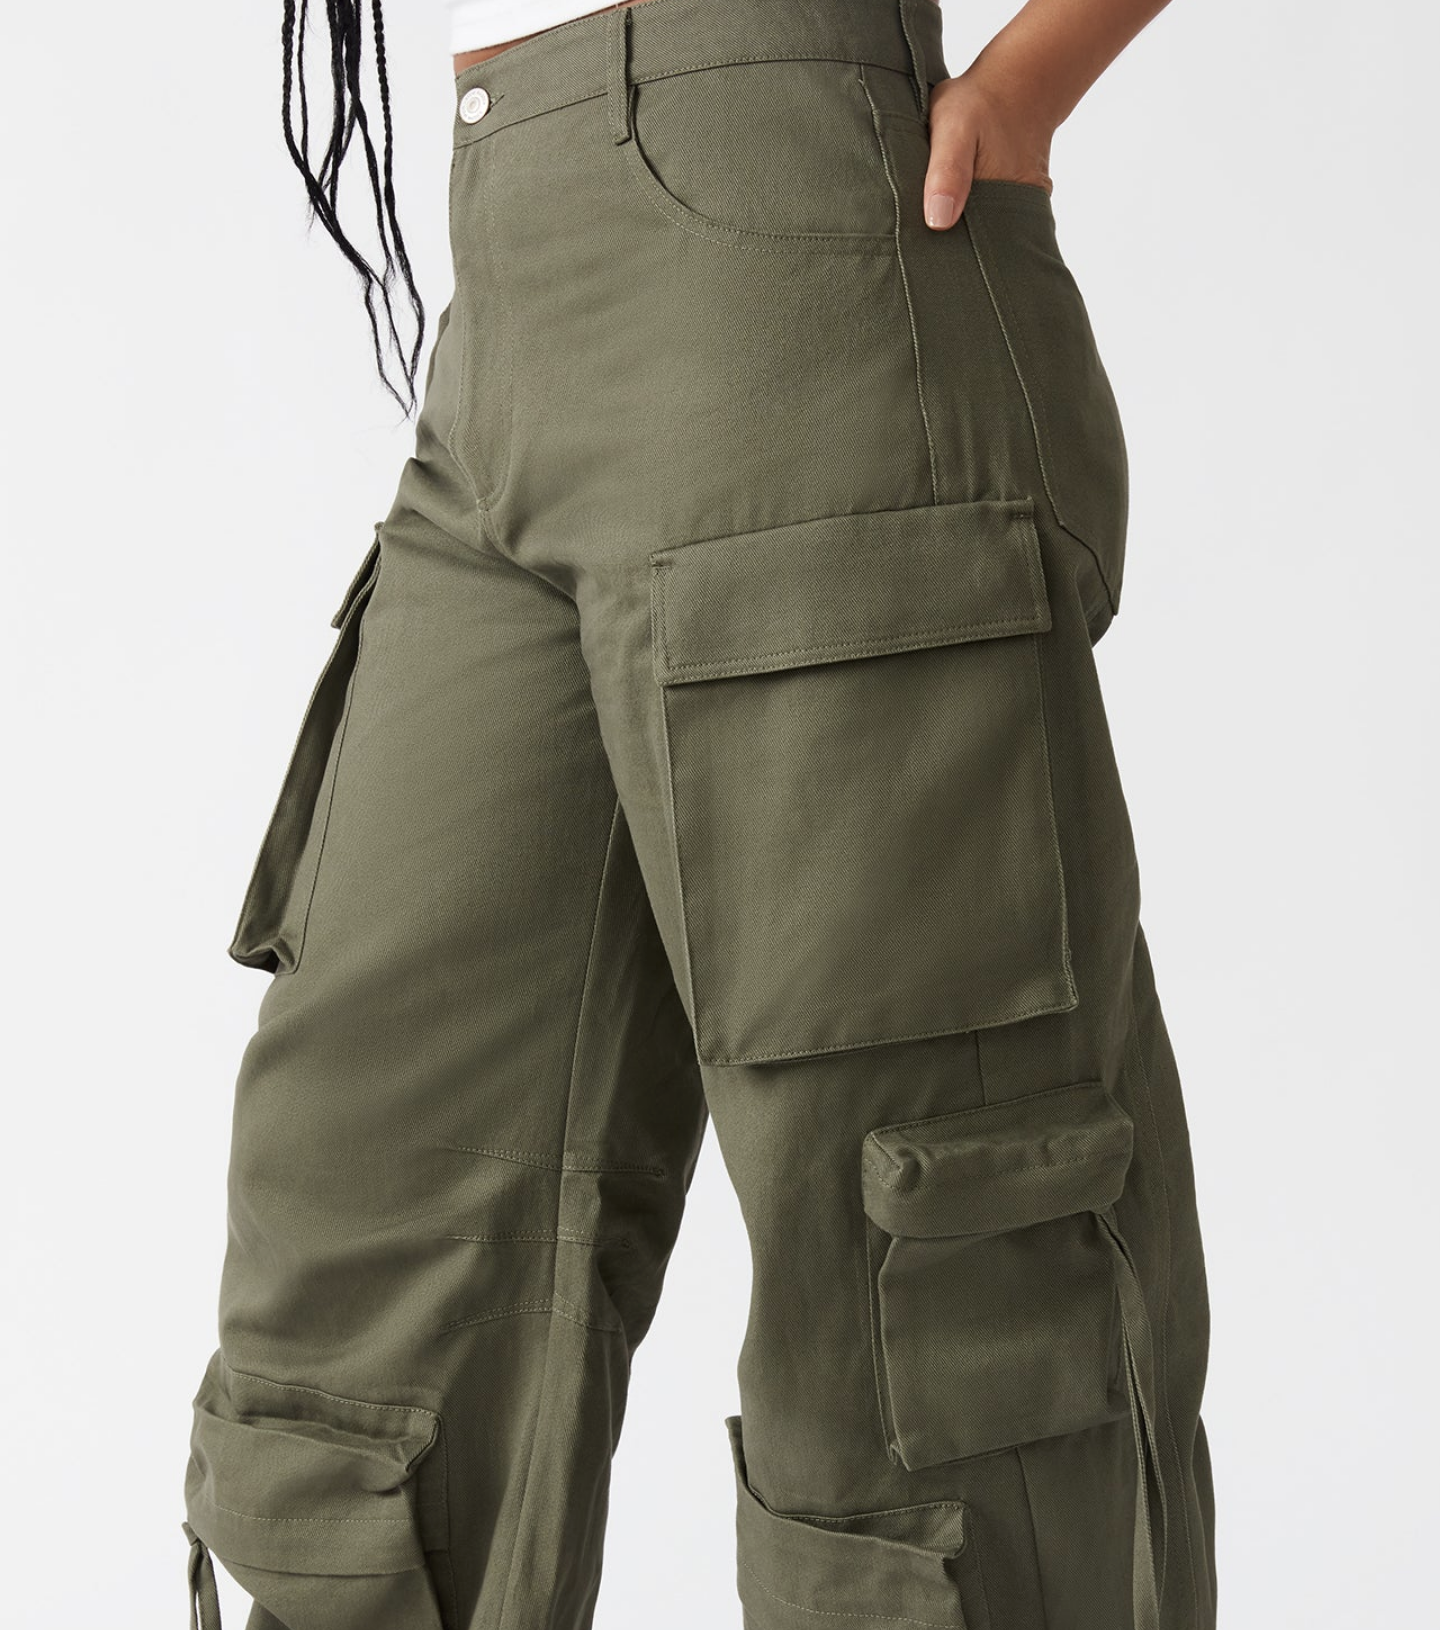 Steve Madden Duo Cargo Pant in Olive